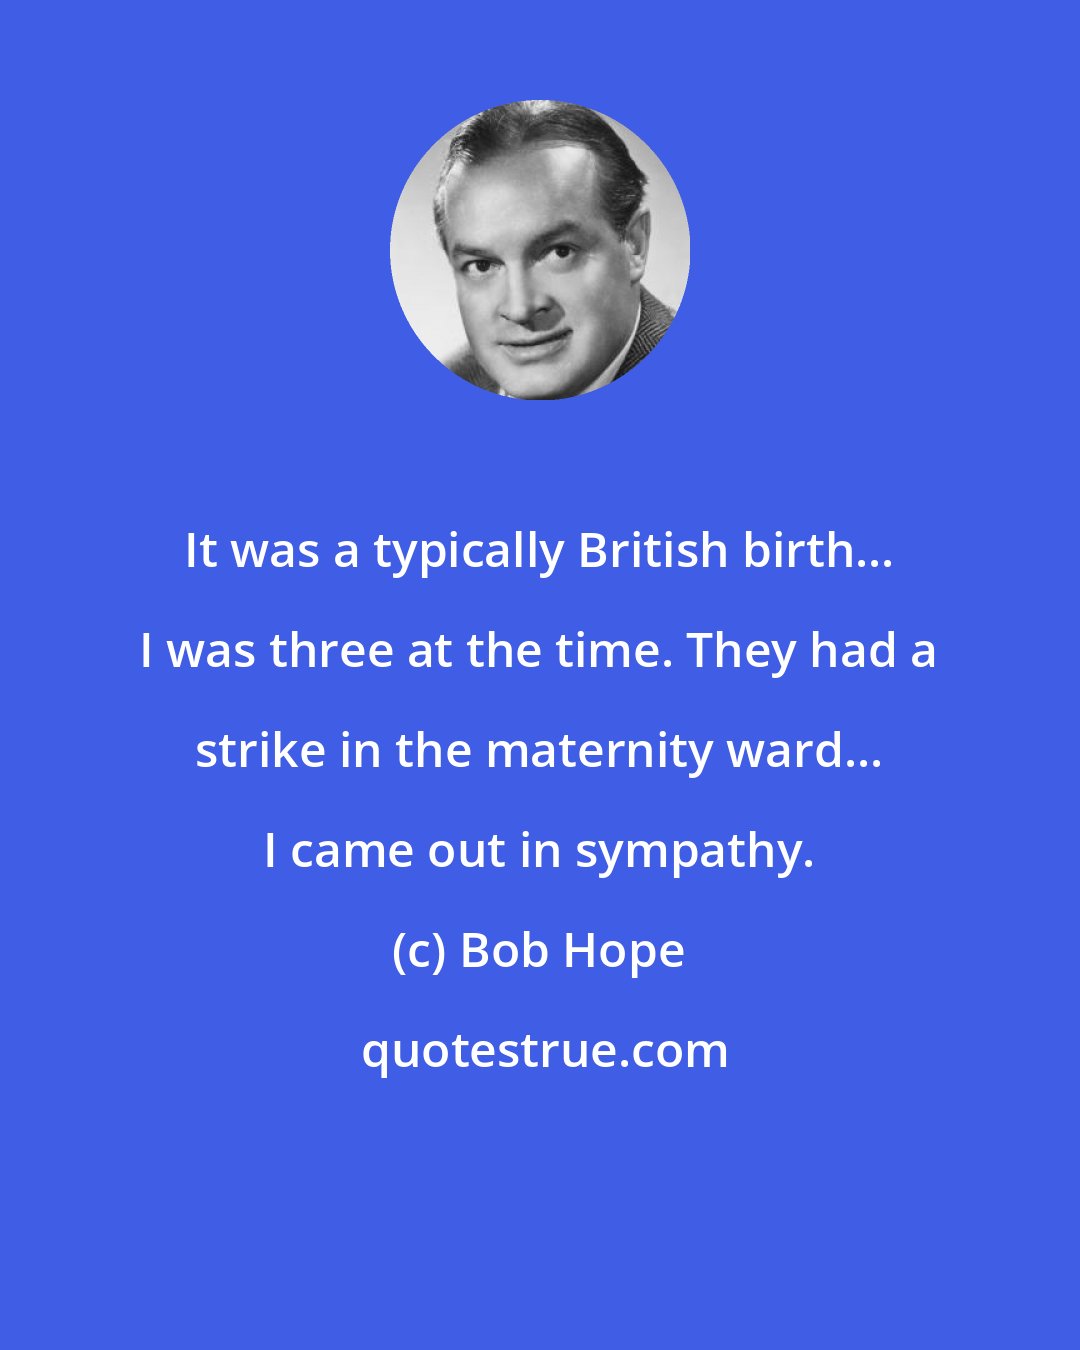 Bob Hope: It was a typically British birth... I was three at the time. They had a strike in the maternity ward... I came out in sympathy.